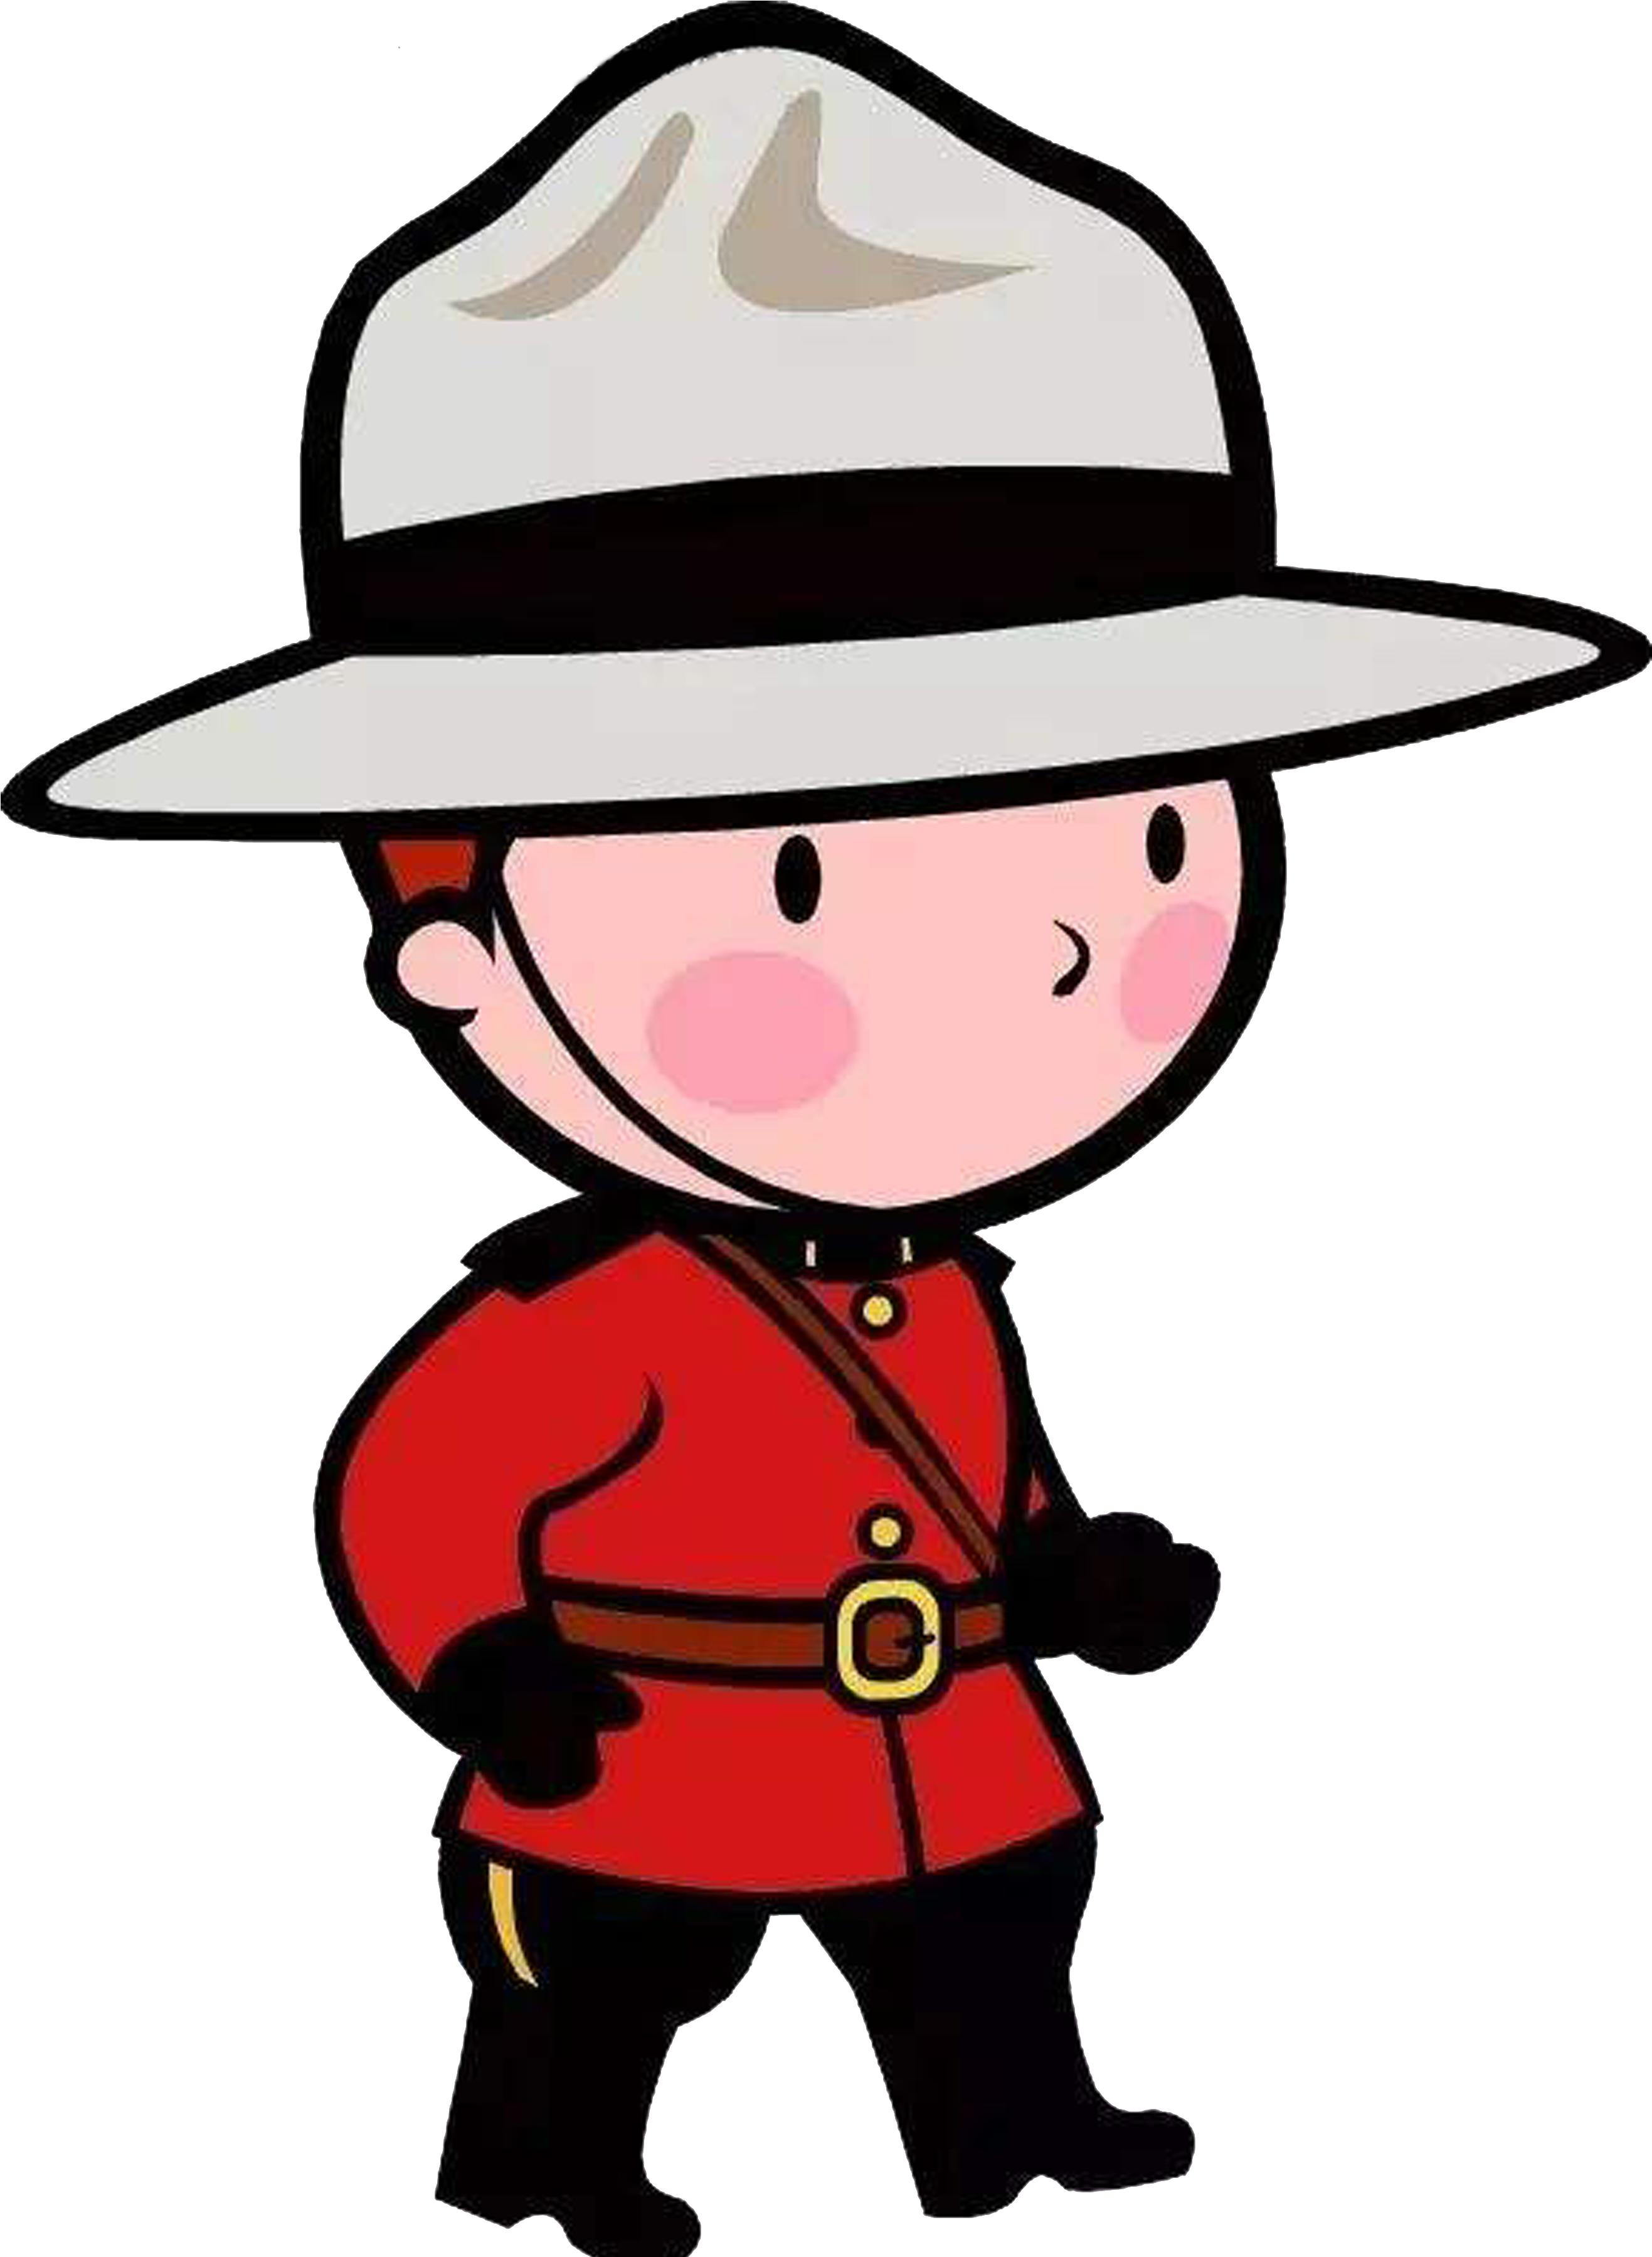 Canada Royal Canadian Mounted Police Clip Art - Soldier (5000x5000)